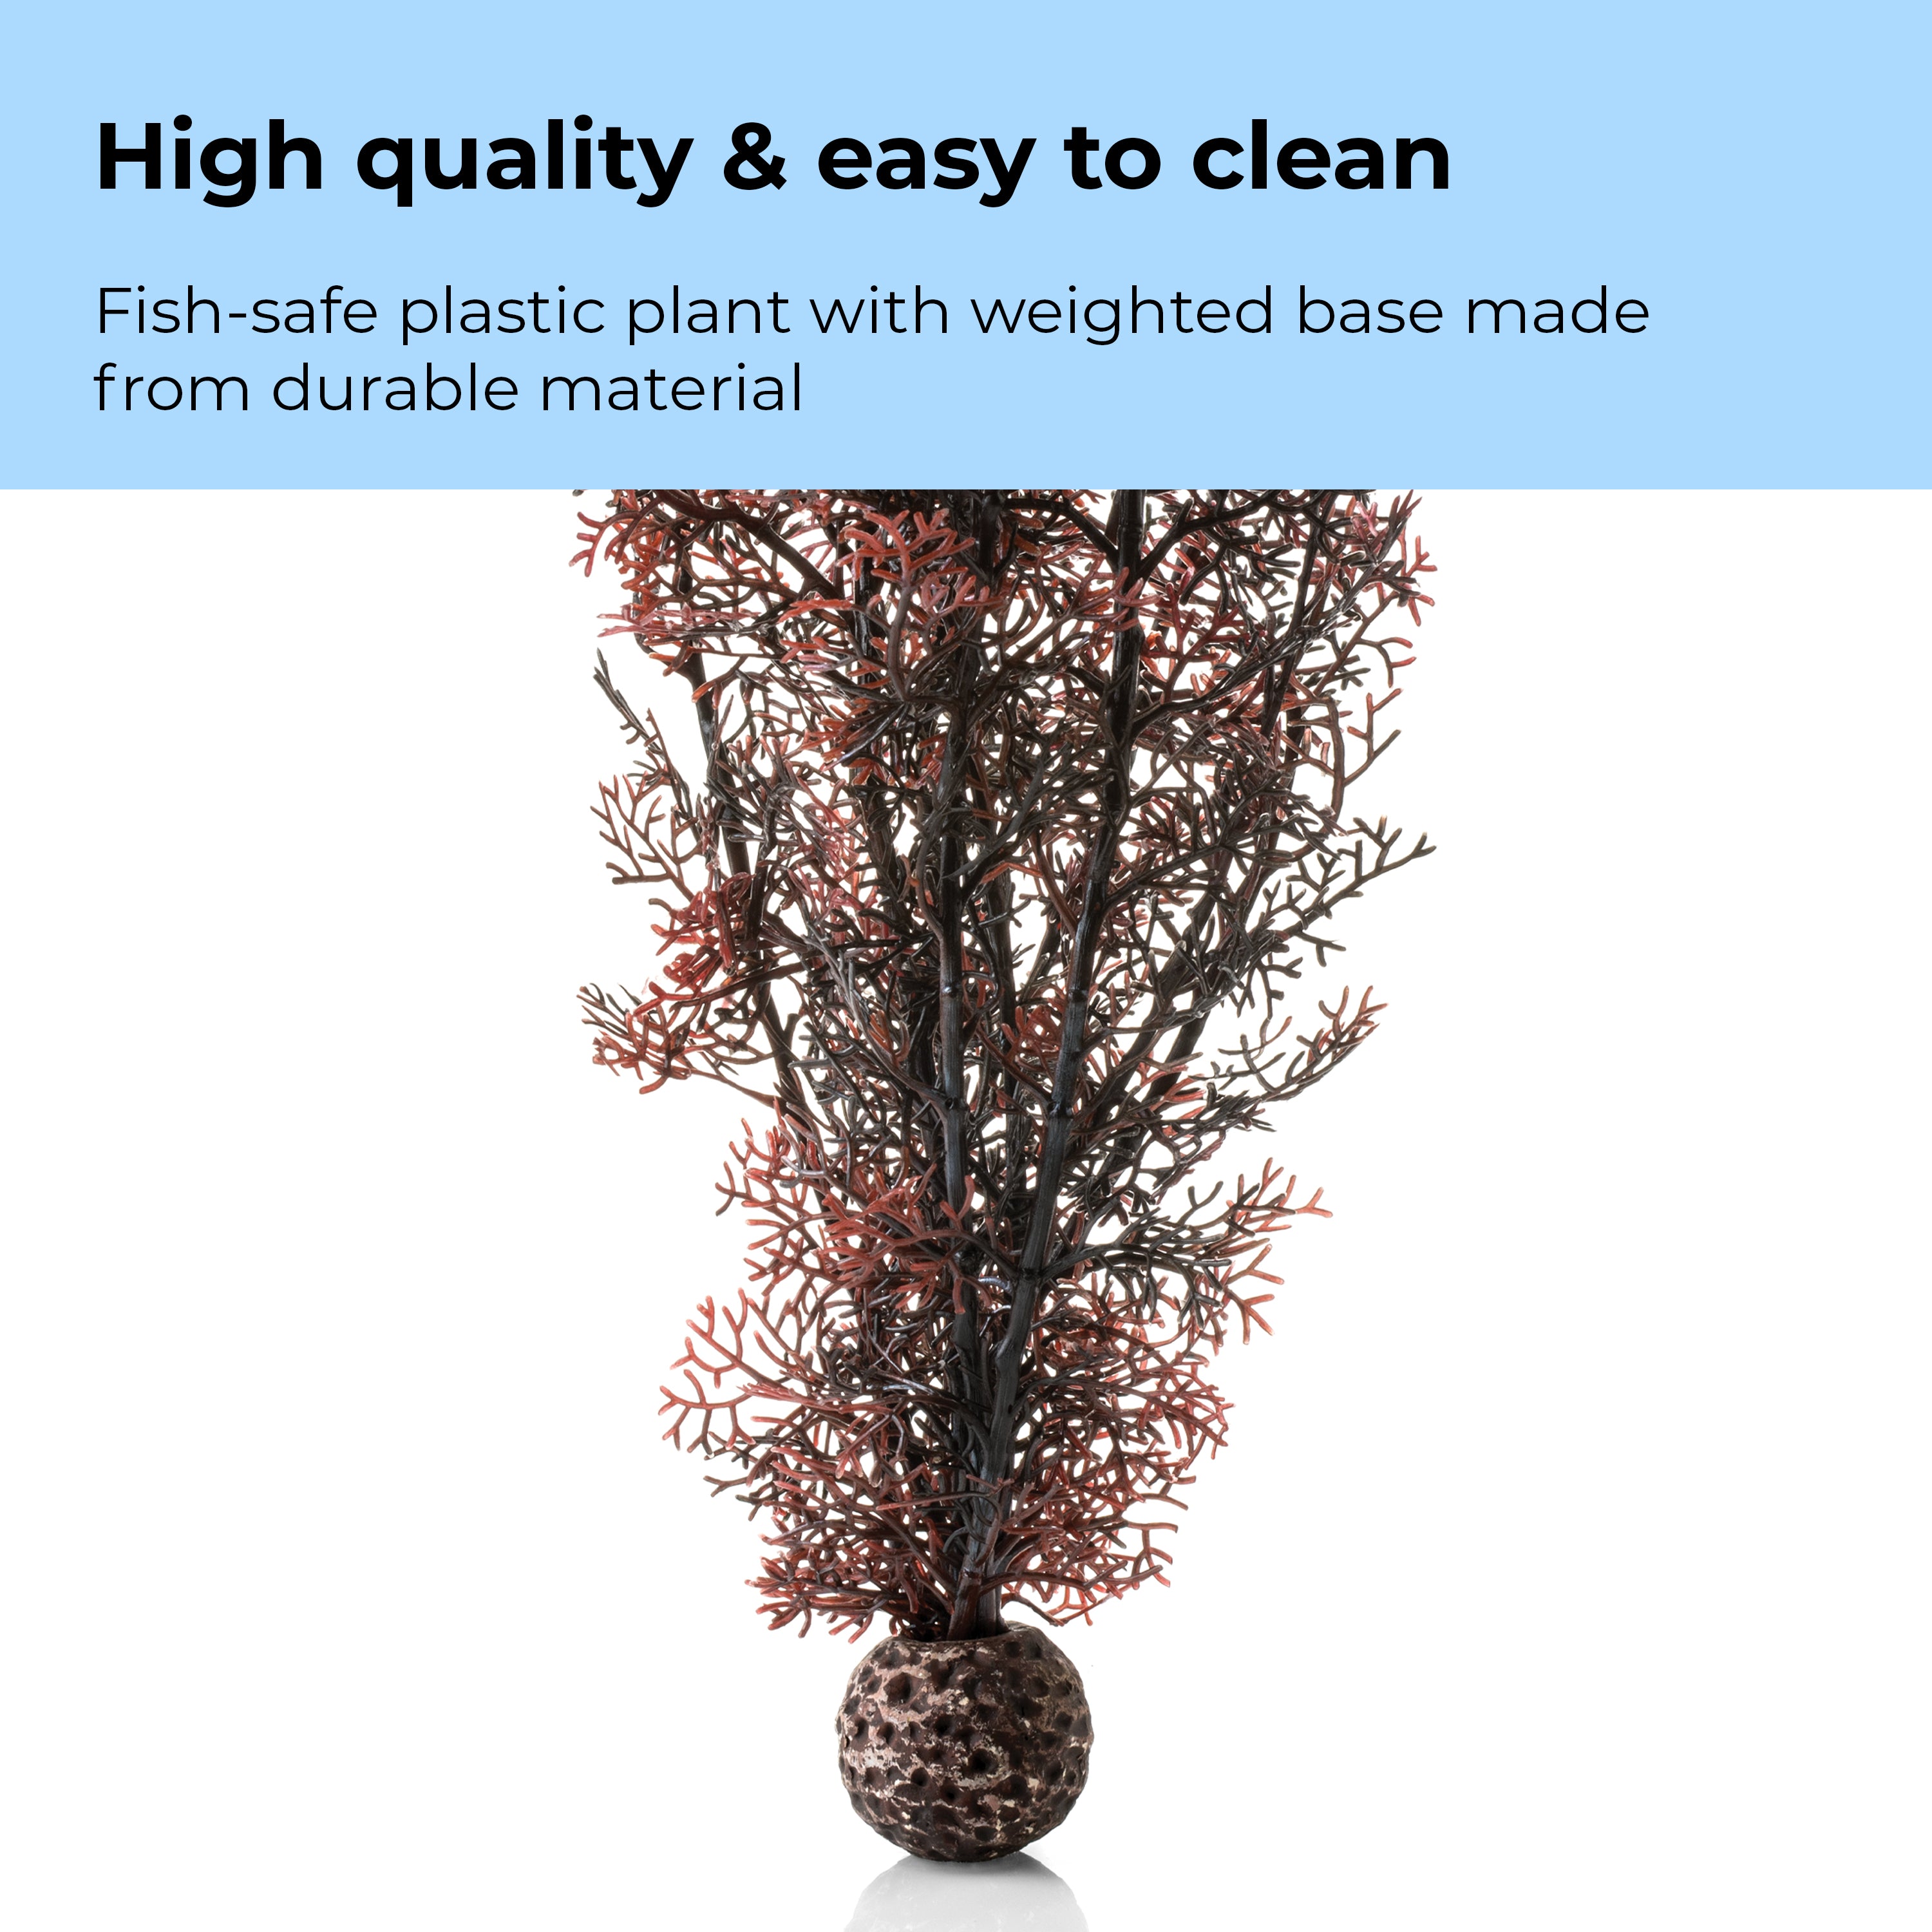 Large Sea Fan - High quality & easy to clean